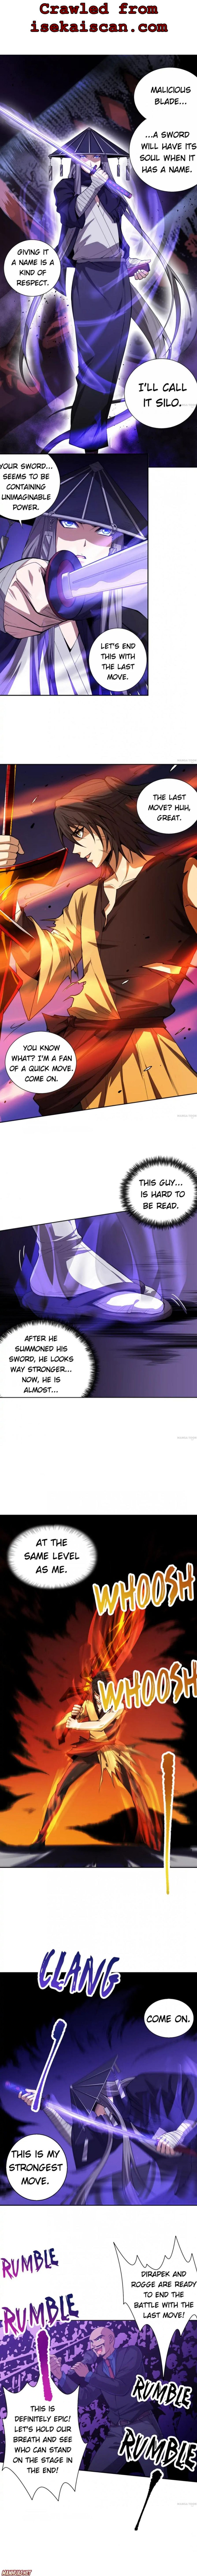 Ultimate Soldier - Page 1